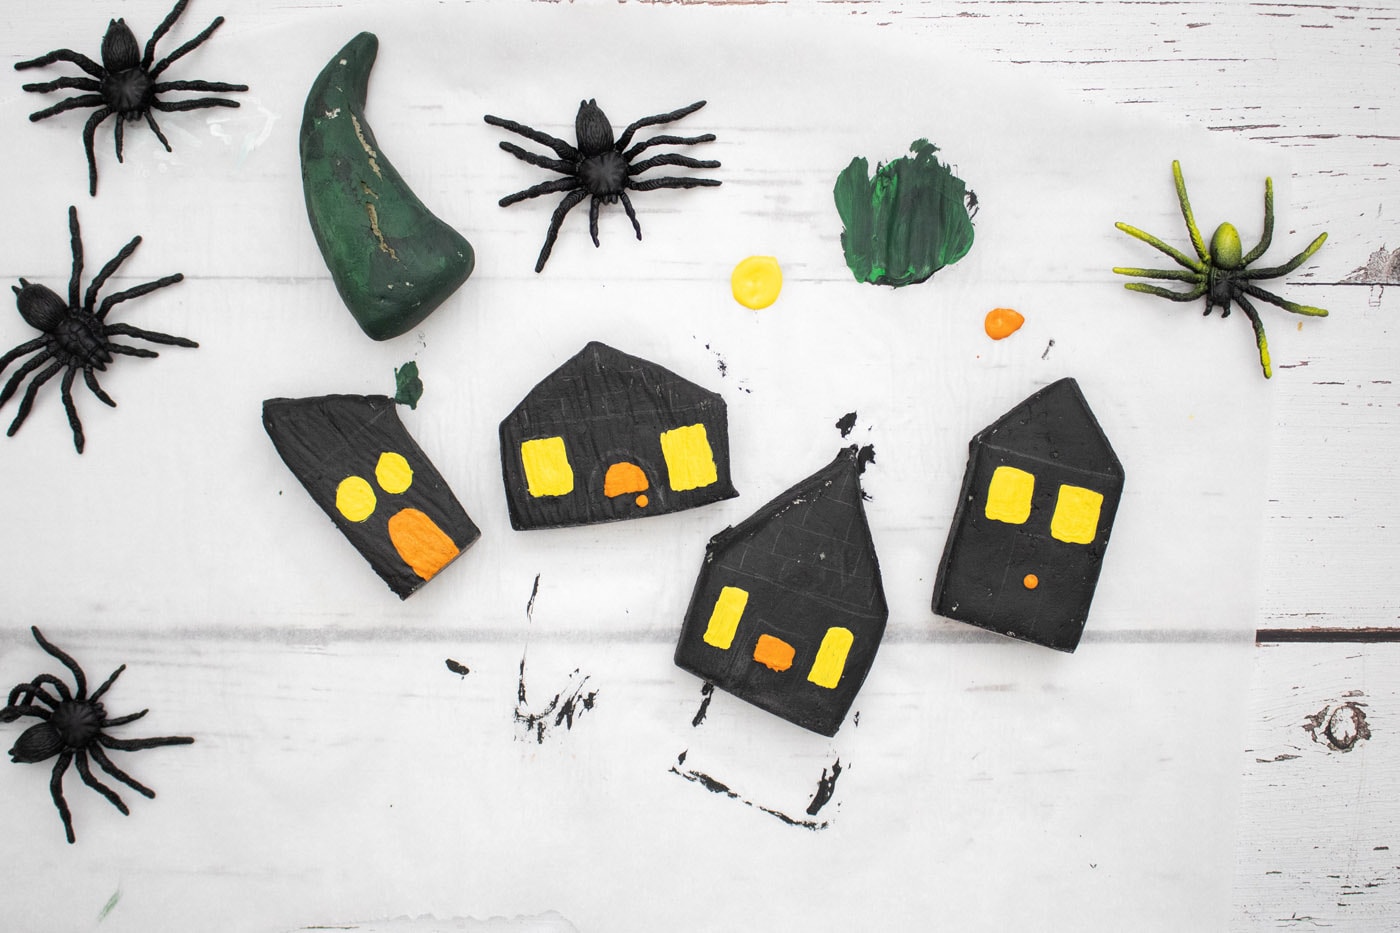 haunted houses made from salt dough